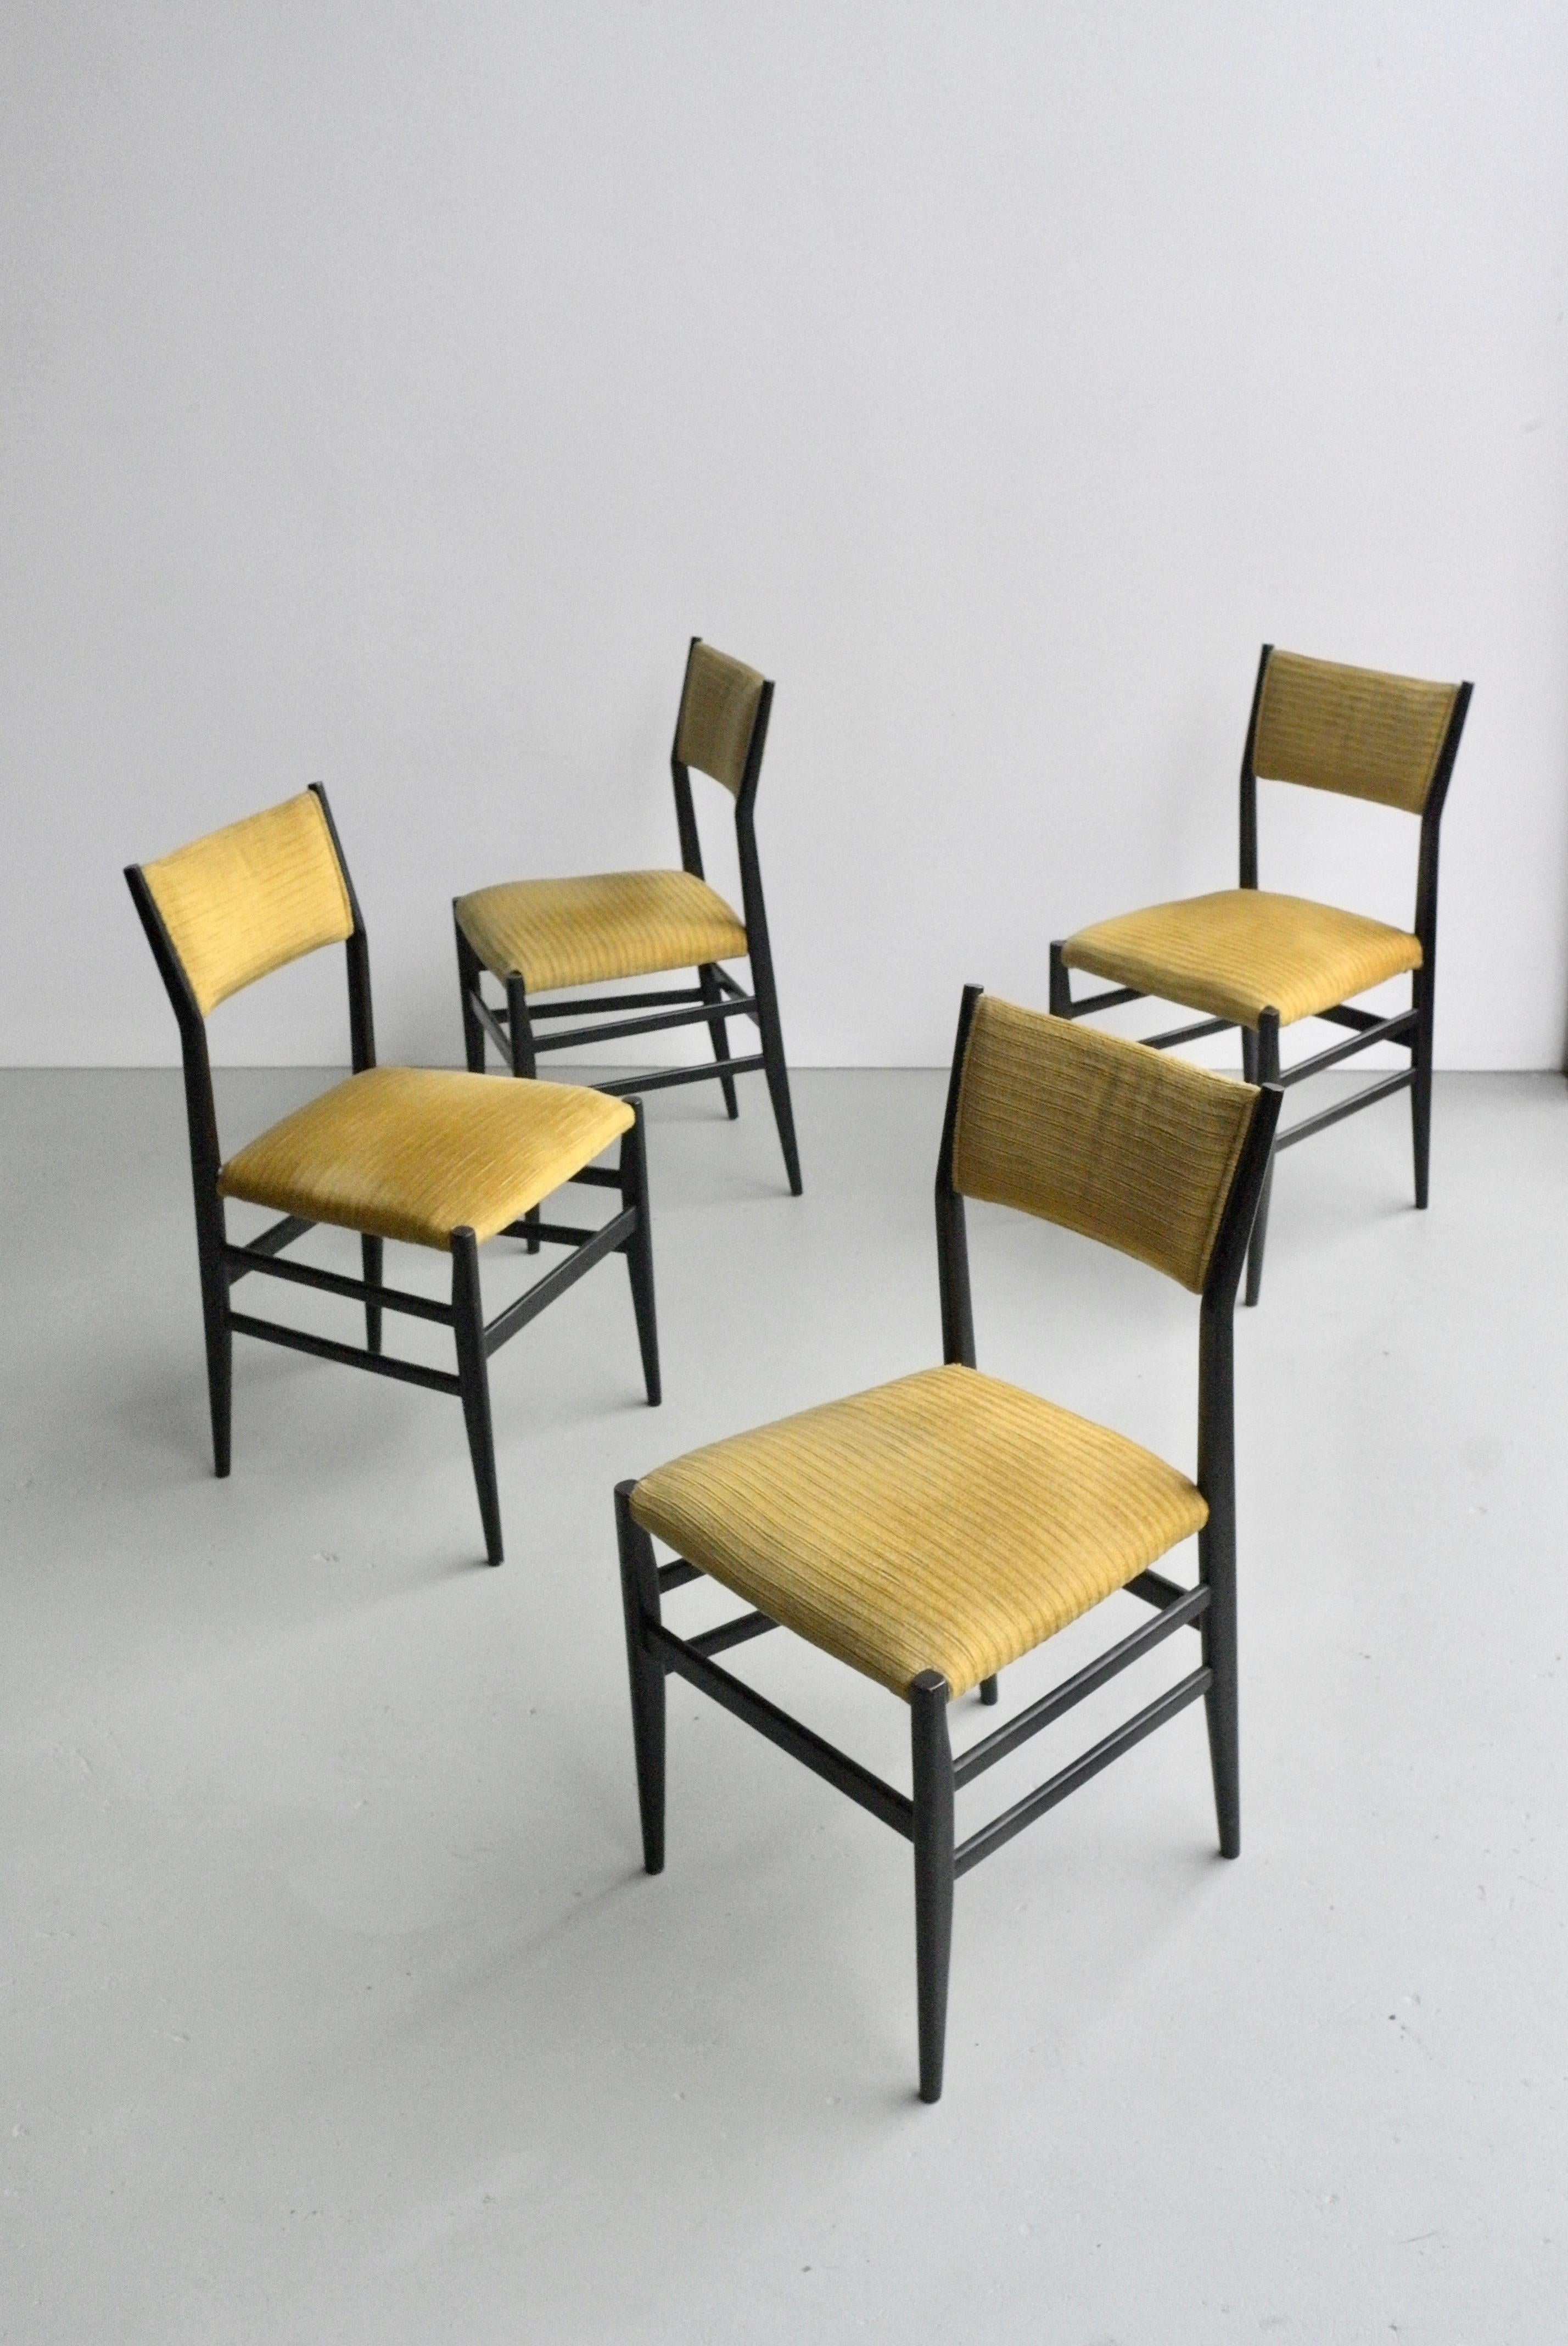 Set of four leggera chairs by Gio Ponti Italy, 1954?
Set of four vintage leggera chairs by Gio Ponti for Cassina, model 646/3. A precursor to 1957s Superleggera, this model was made with upholstered seats and backs. All original with black painted